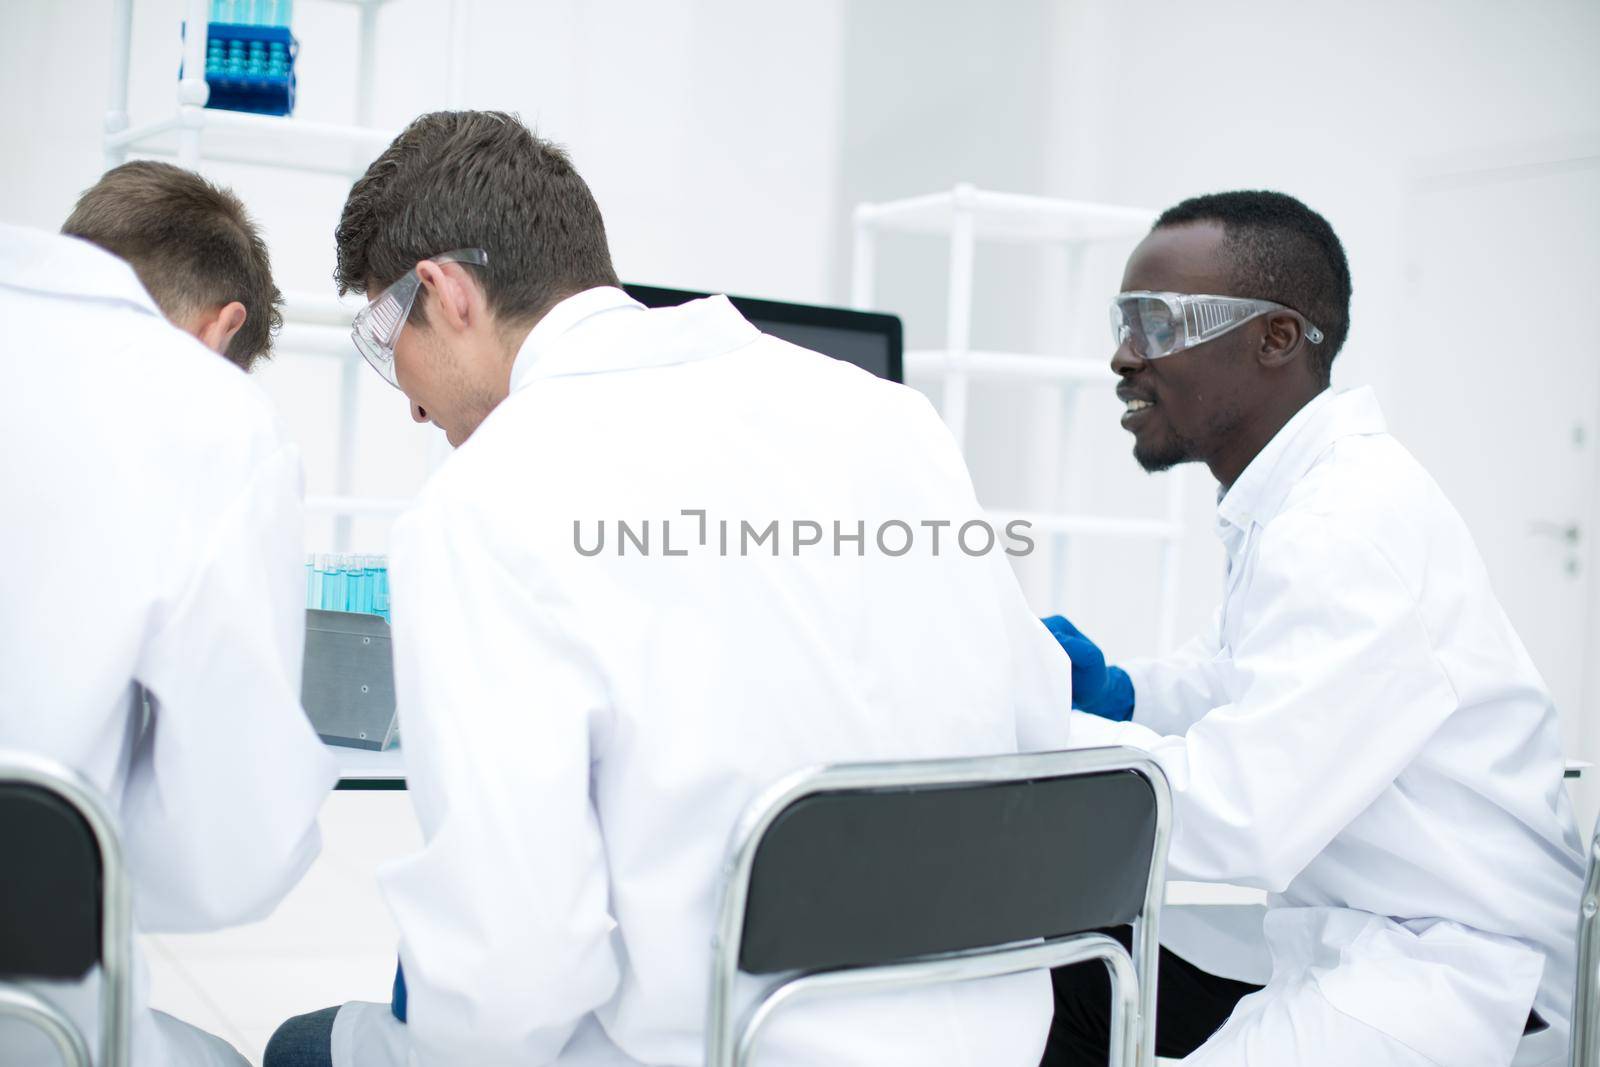 rear view. a group of scientists at the laboratory table by asdf